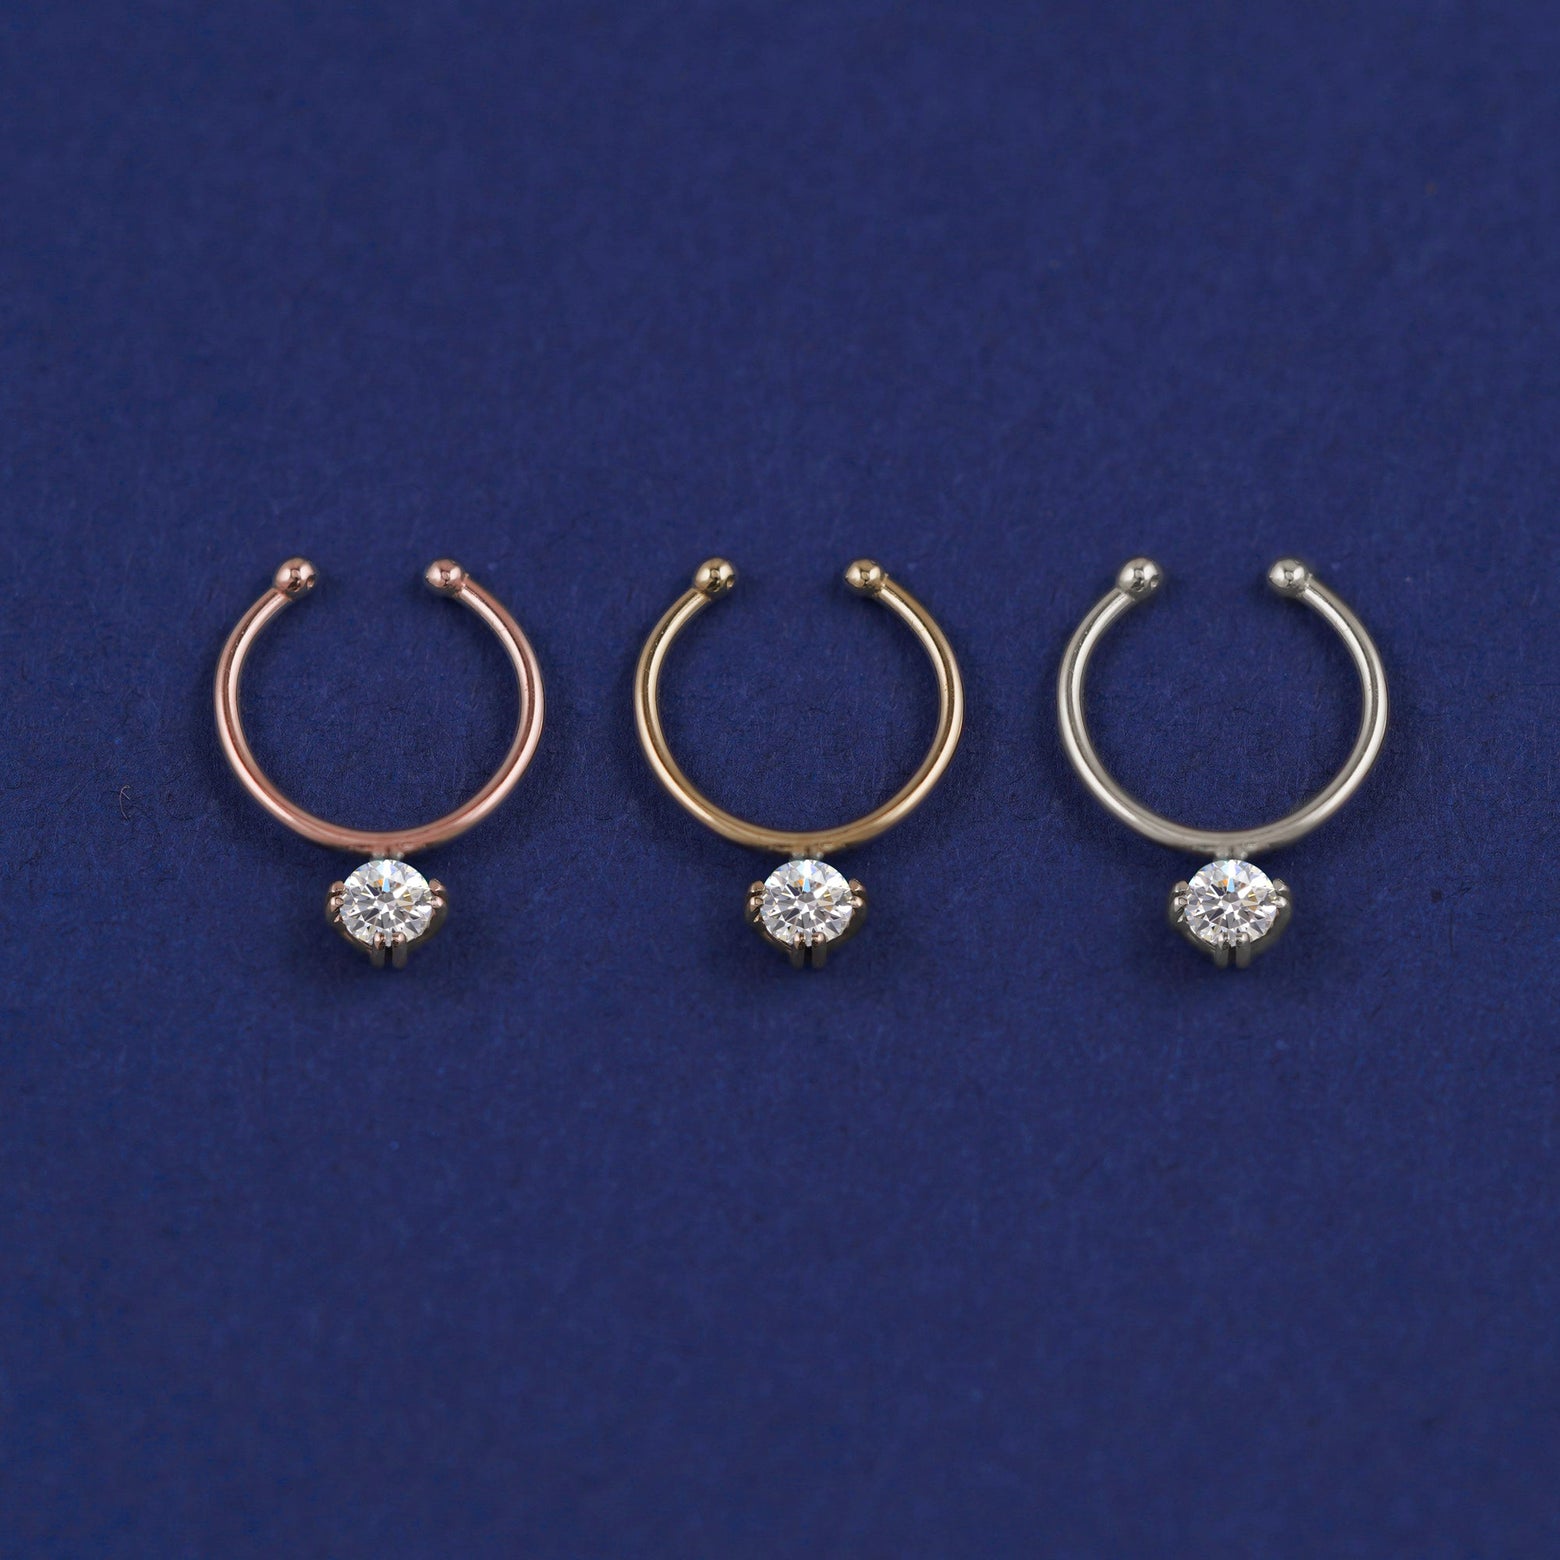 Three versions of the Non-Pierced Diamond Septum shown in options of rose, yellow, and white gold